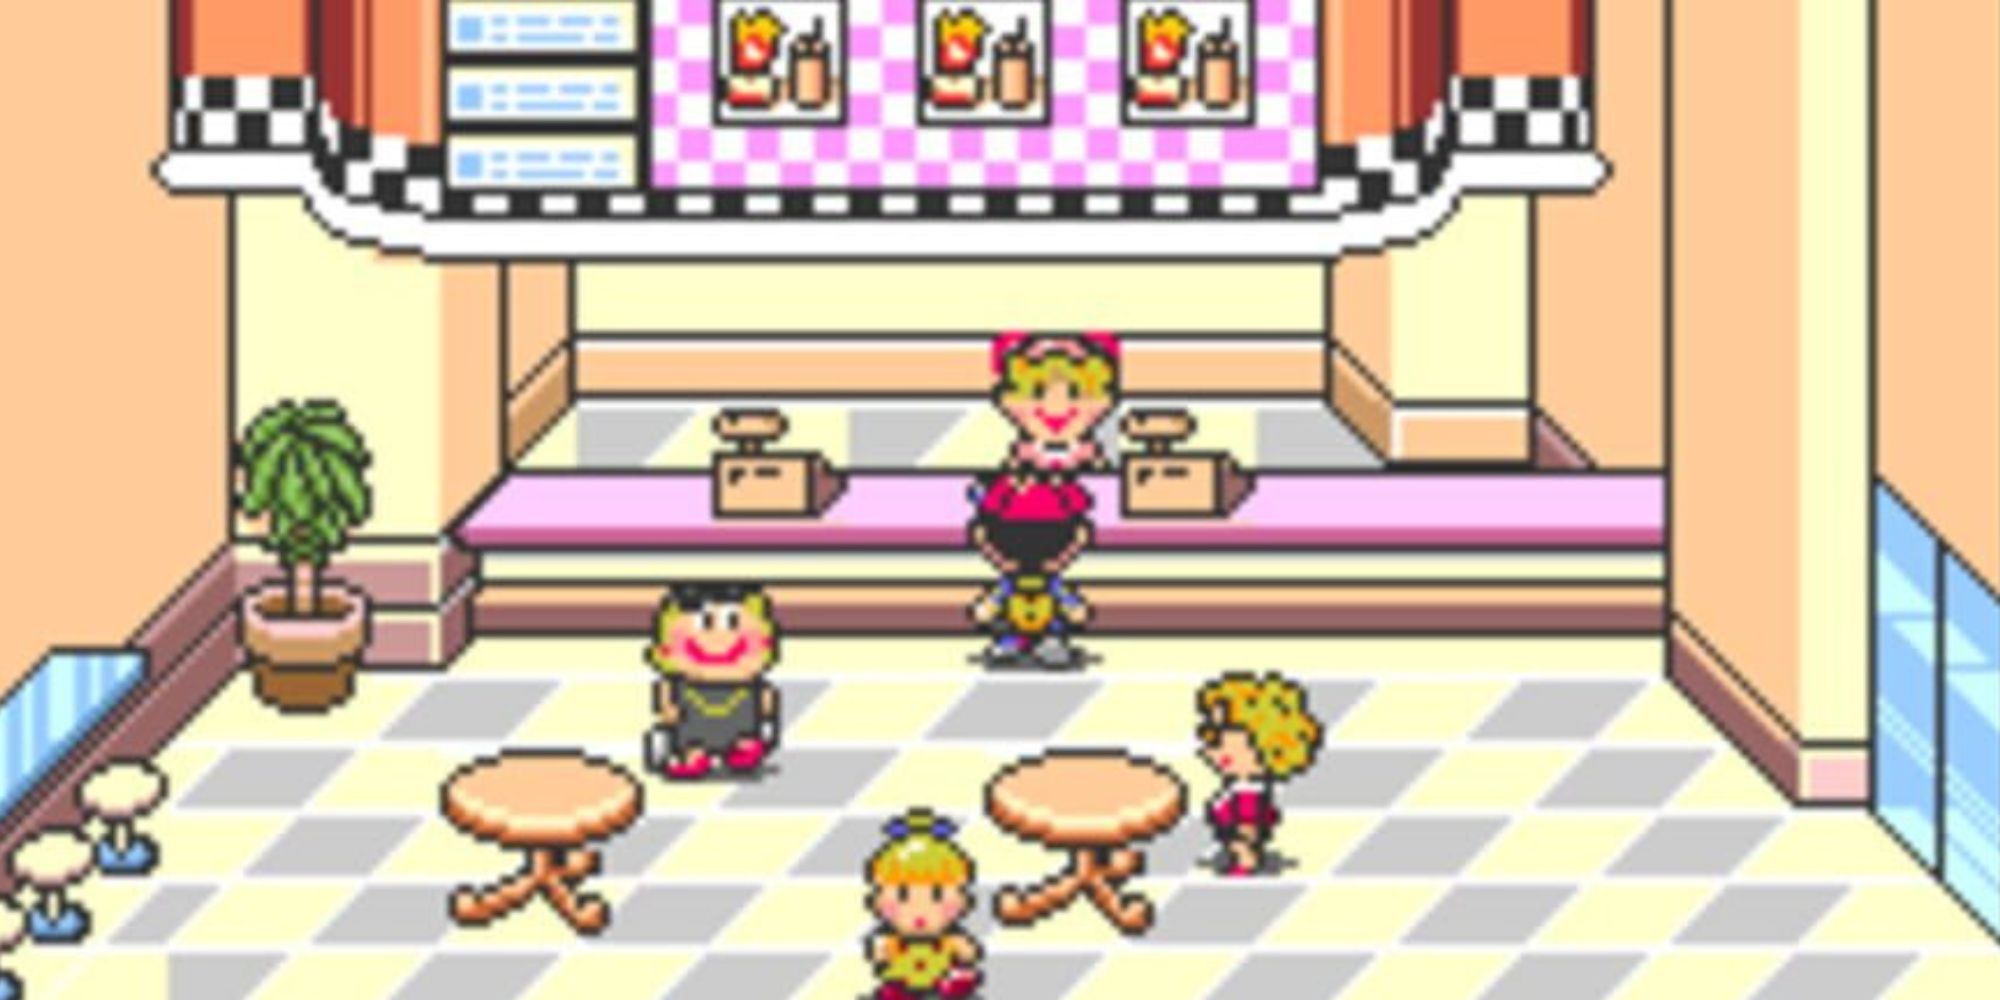 Ness orders food at the counter